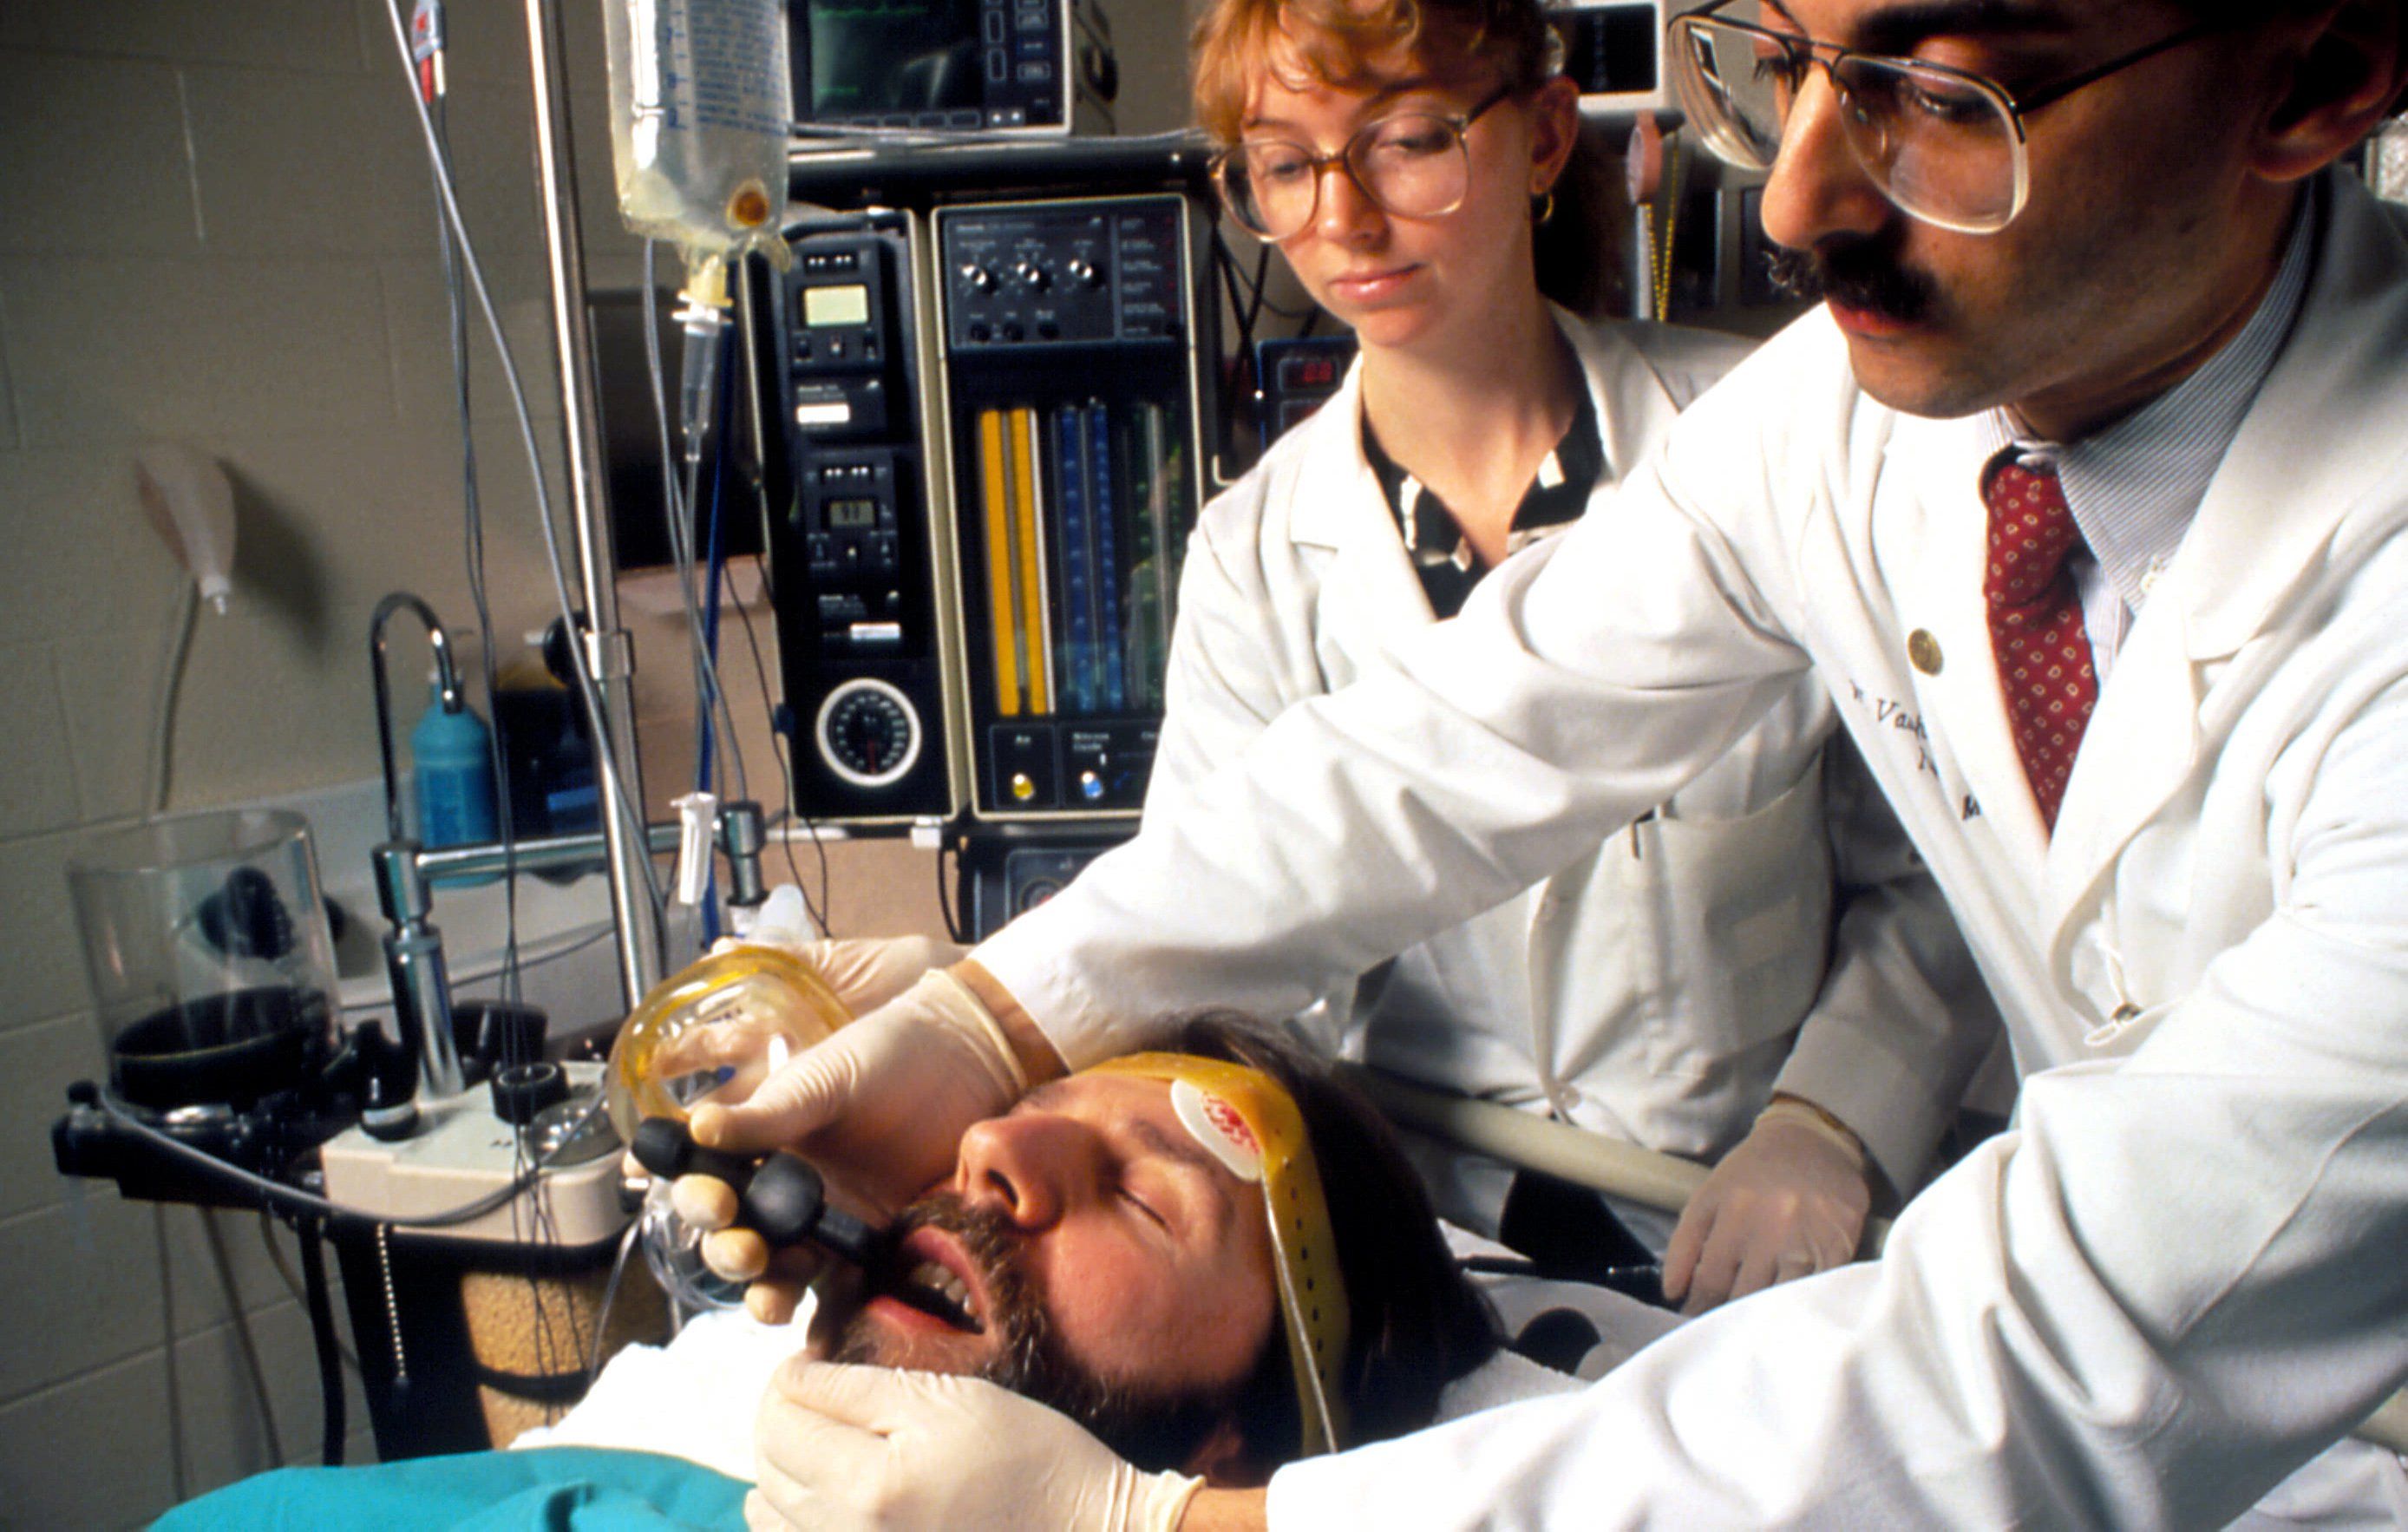 Electroconvulsive Shock Therapy (ECT) Is Making a Comeback